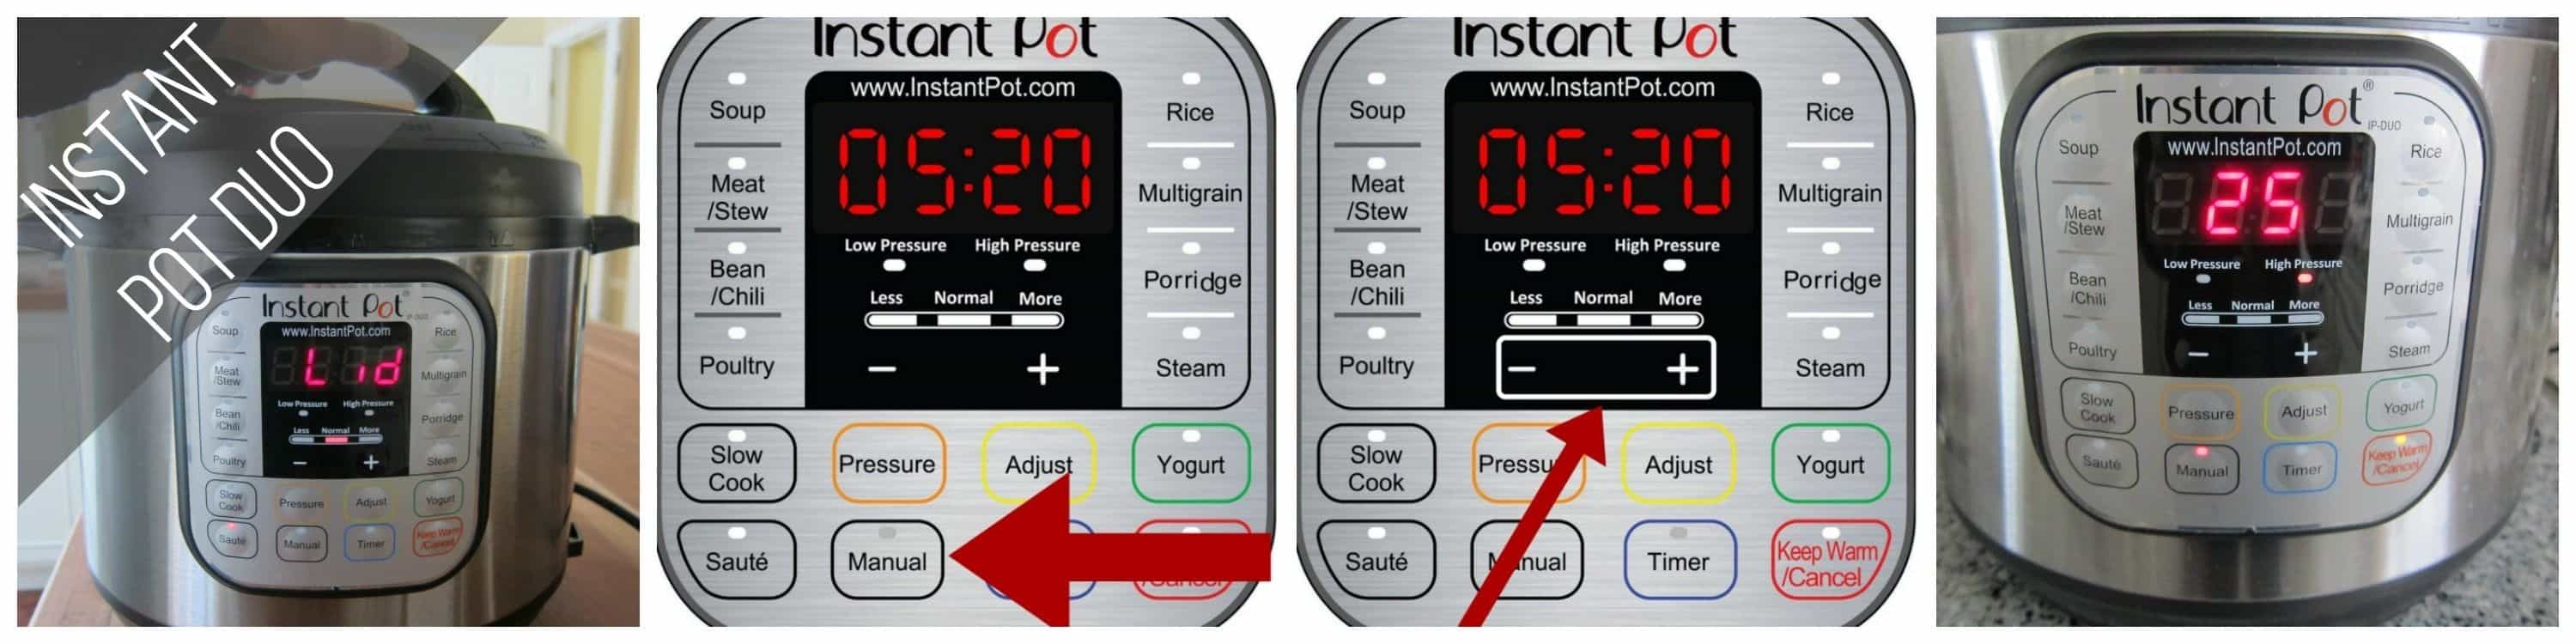 Instant Pot Duo Manual mode 25 minutes collage - close lid, press manual, press - or +, display shows 25 - Paint the Kitchen Red